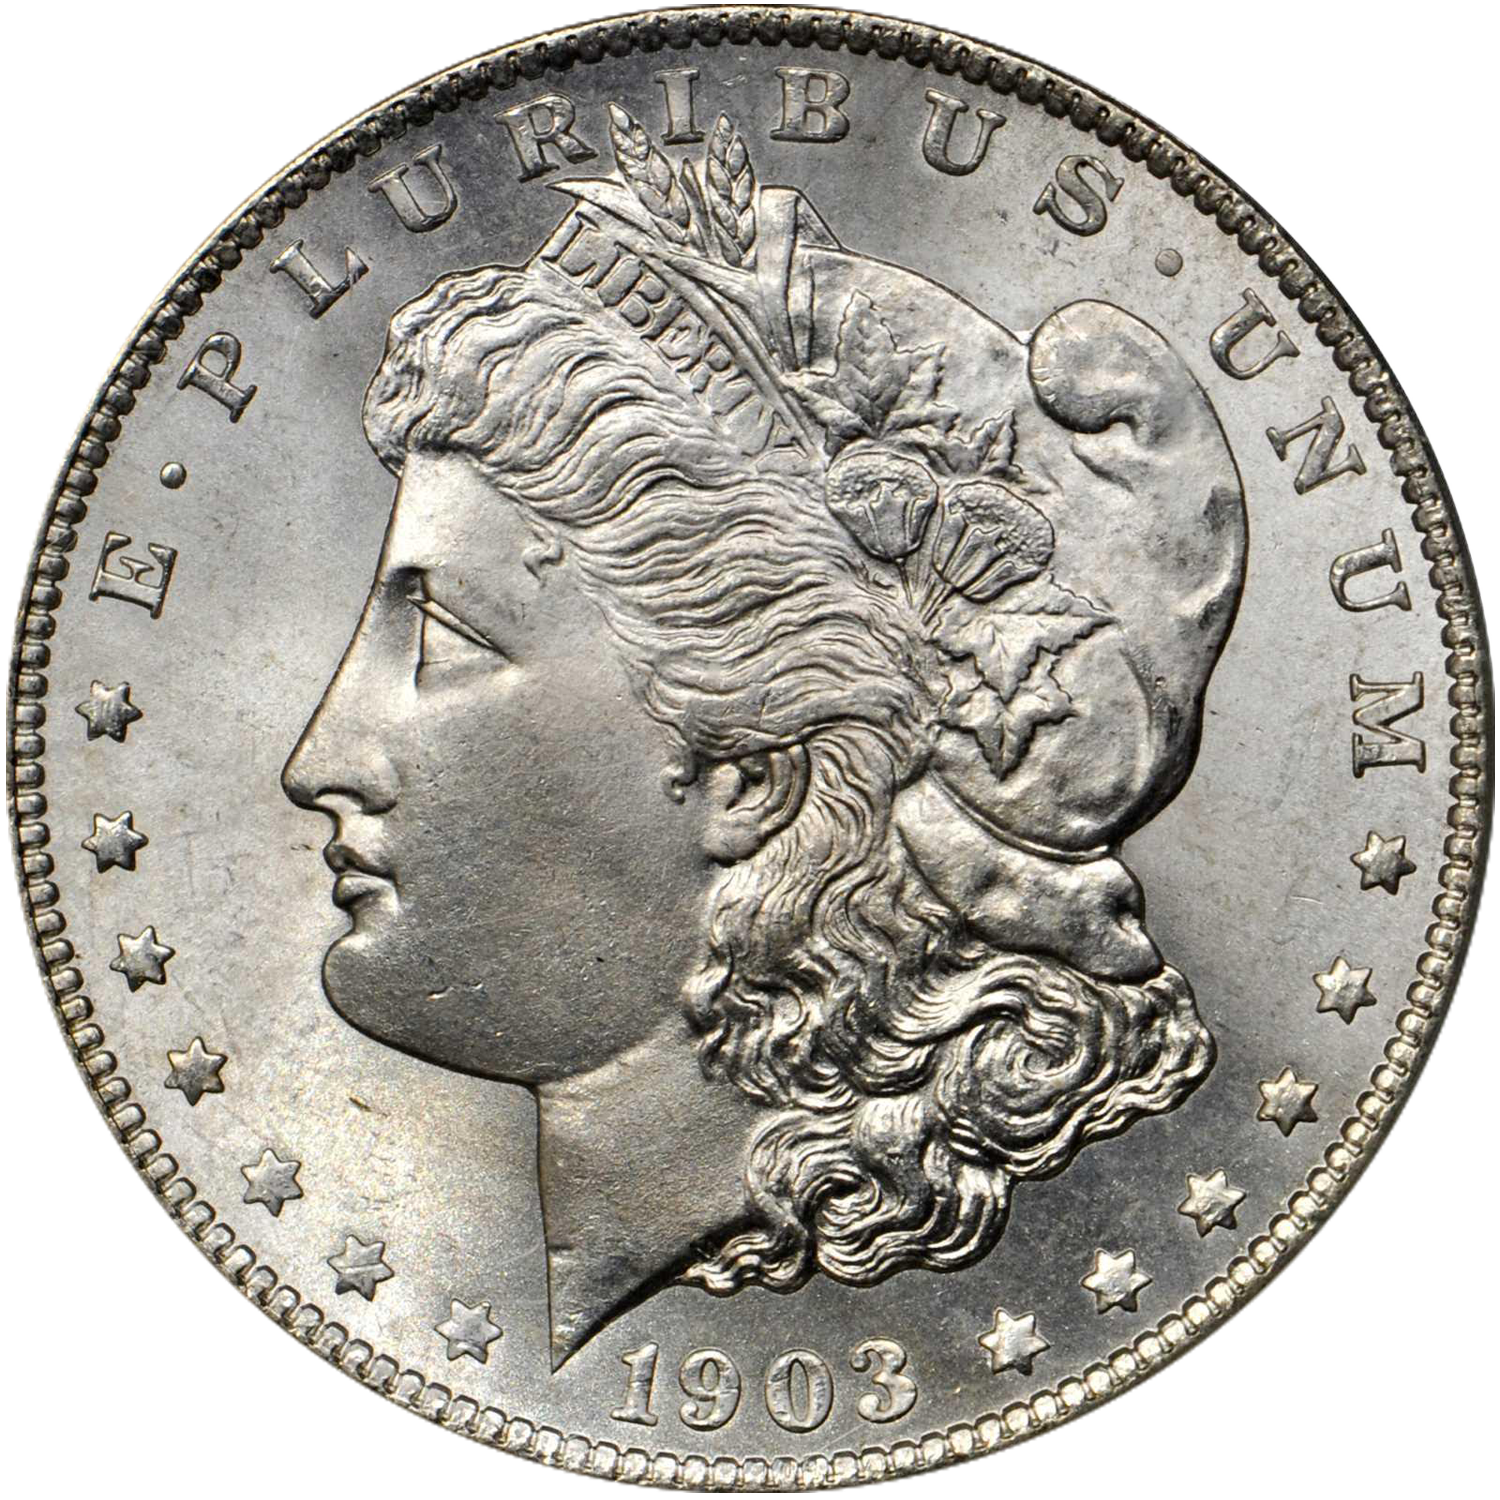 1903 s mint morgan dollar price guide value